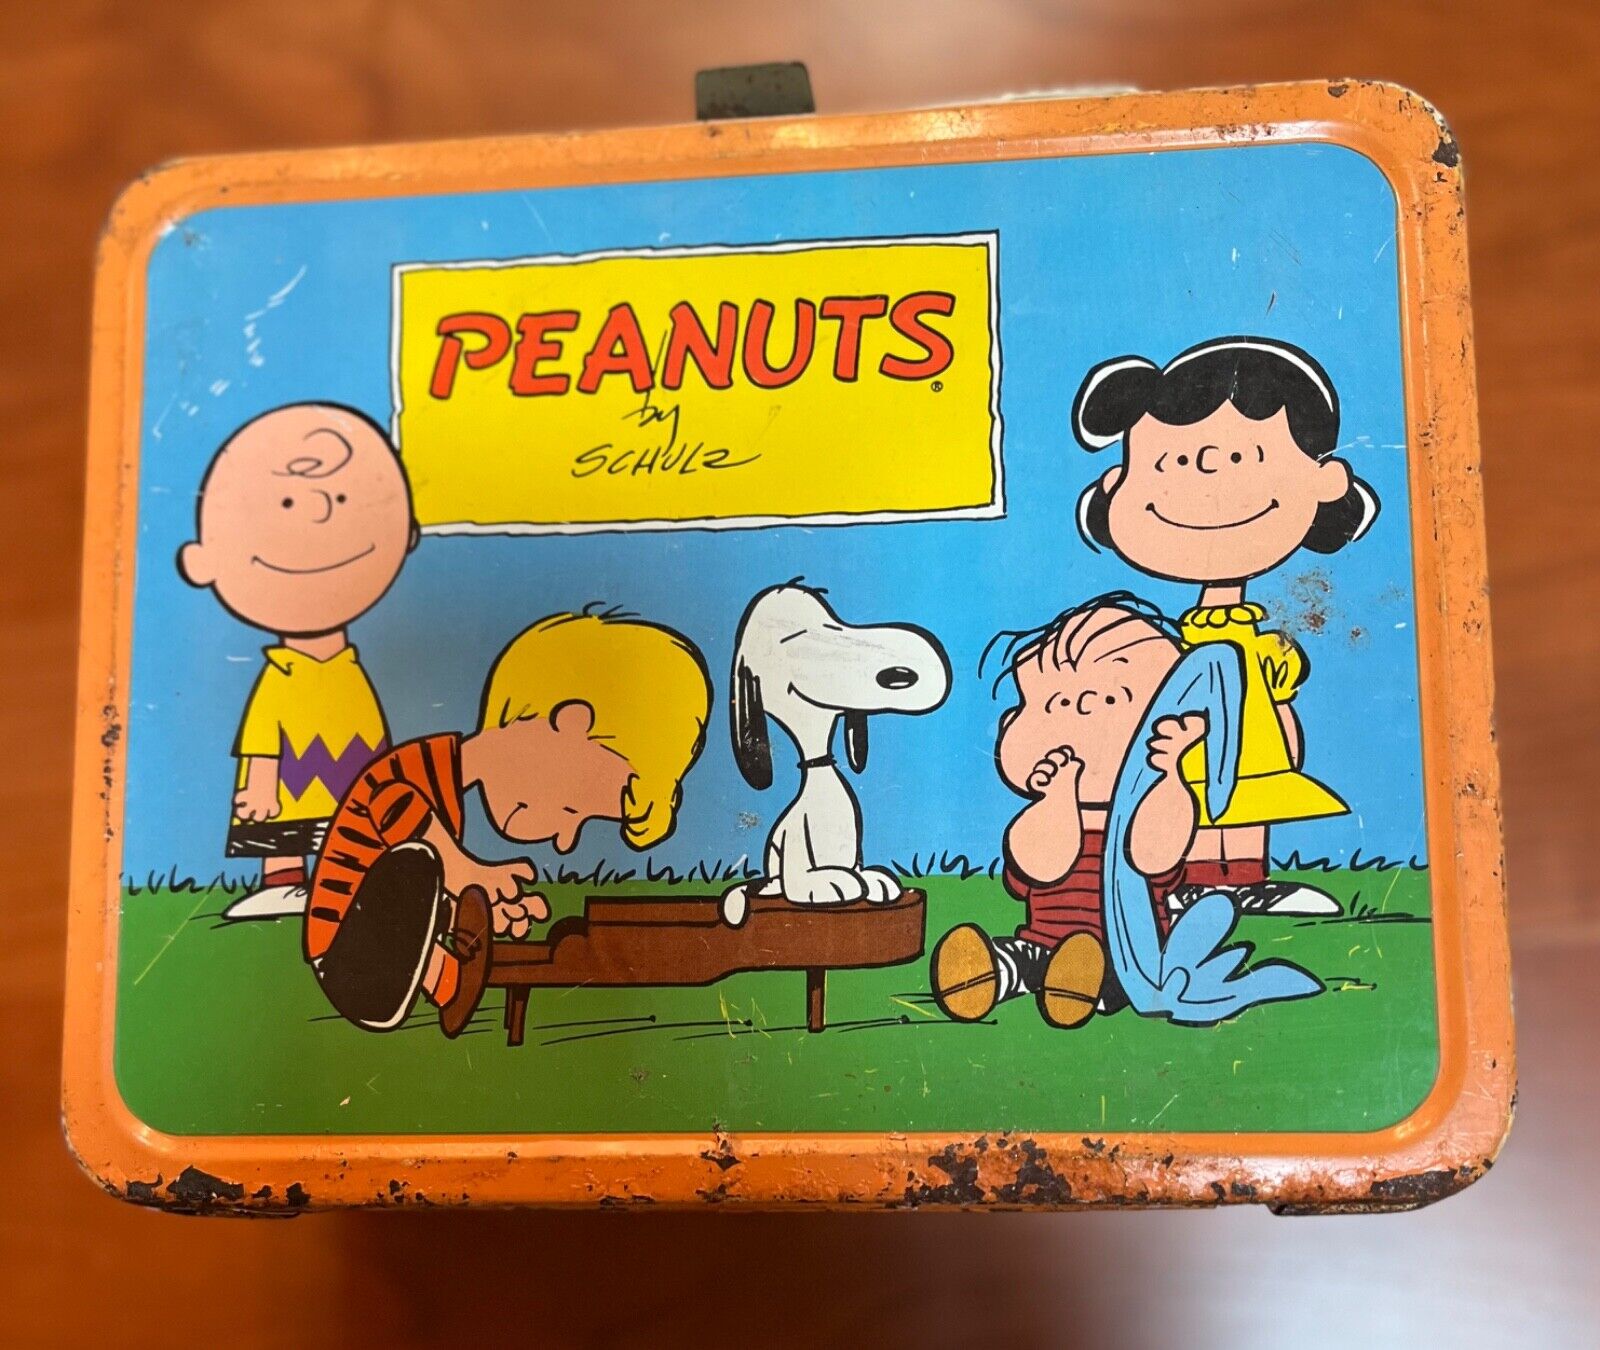 1959 “Peanuts”by Schultz lunch box by King-Seely Thermos Co.  No Thermos